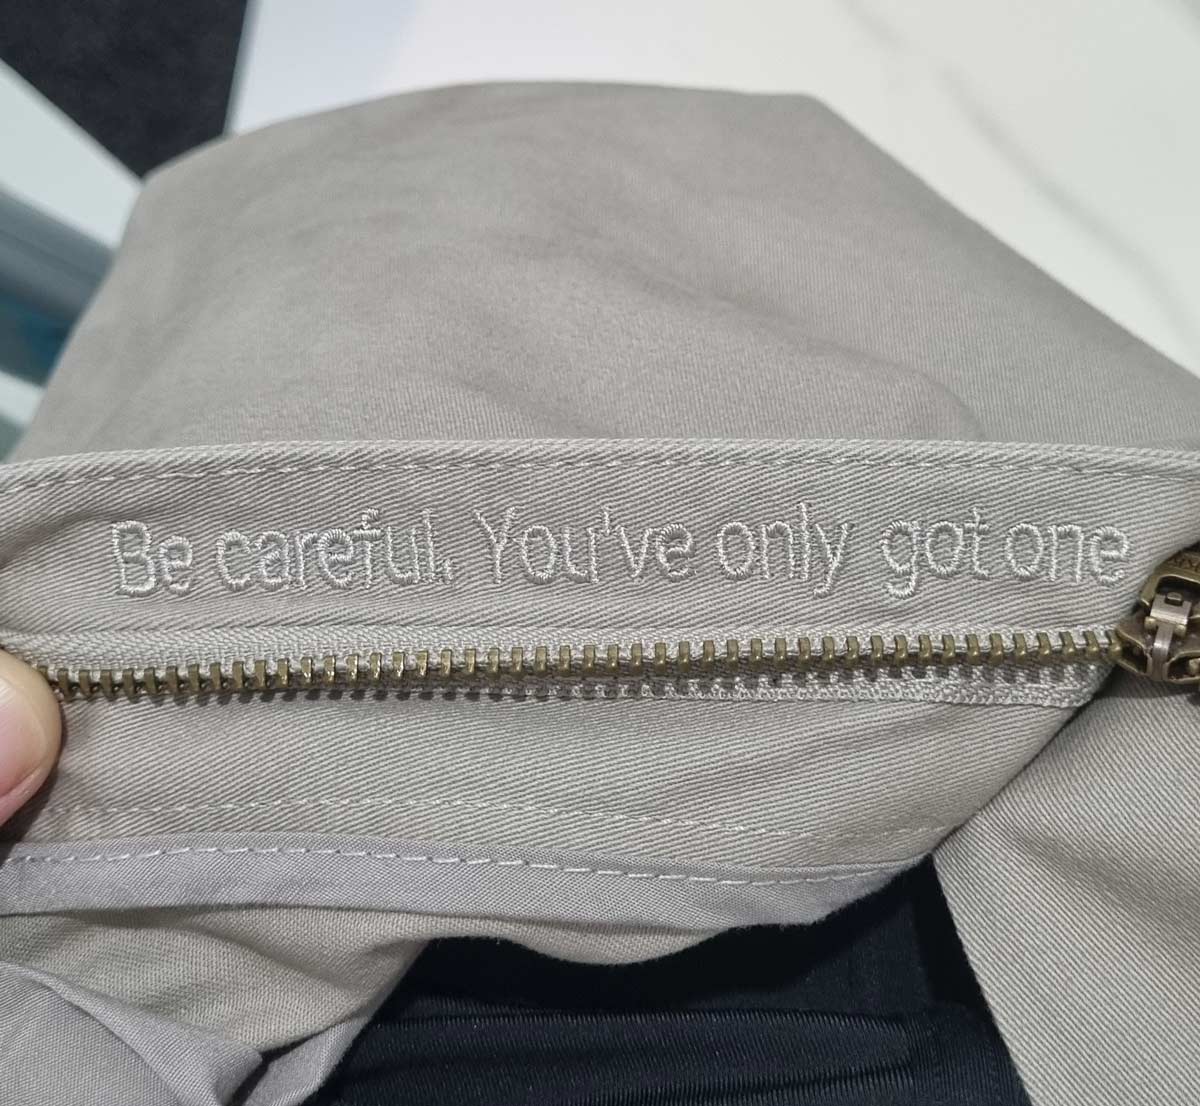 A reminder on the inside of my pants